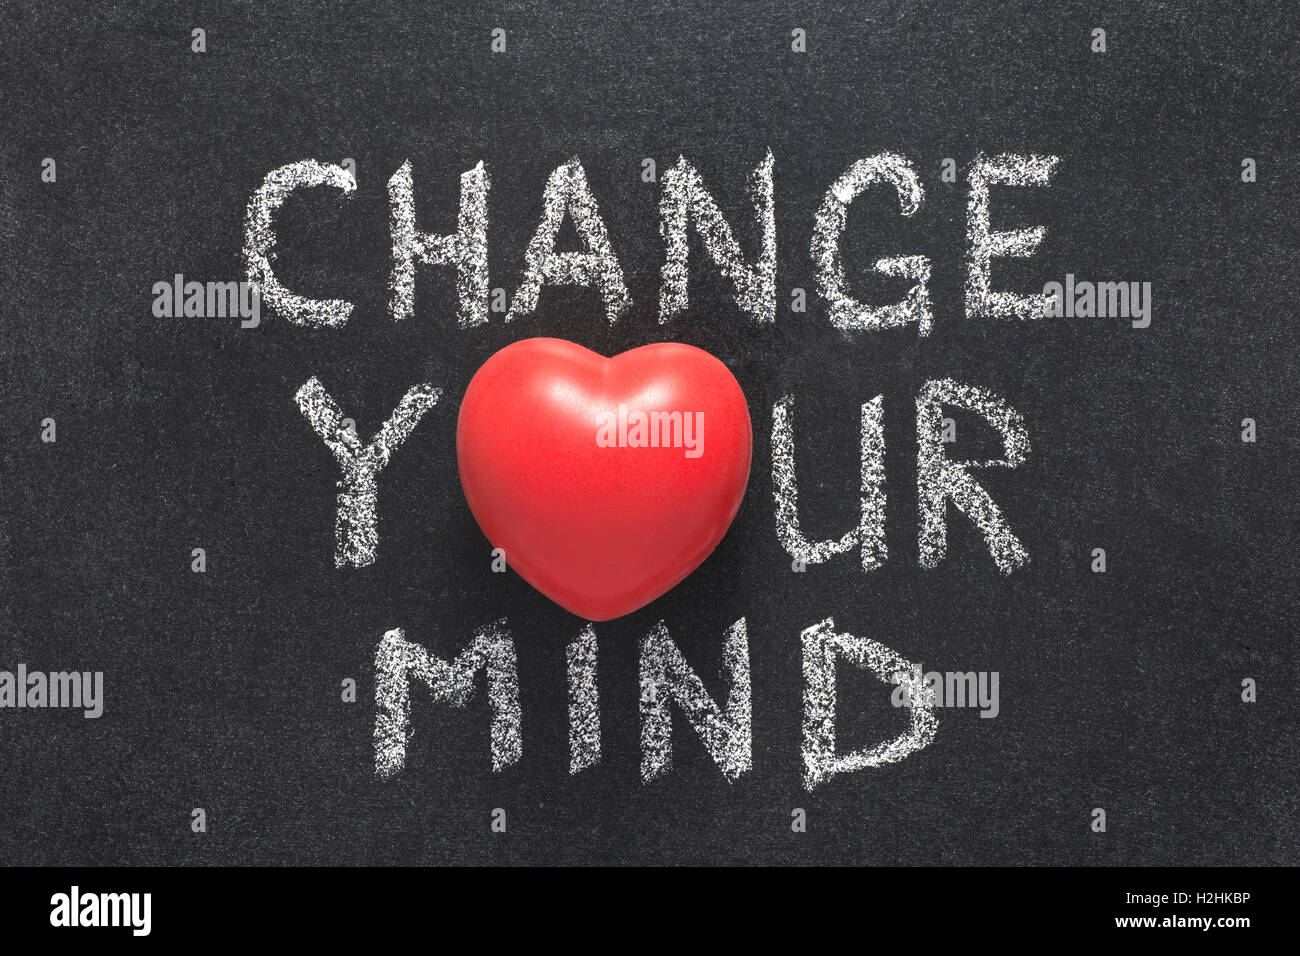 change your mind phrase handwritten on blackboard with heart symbol instead of O Stock Photo